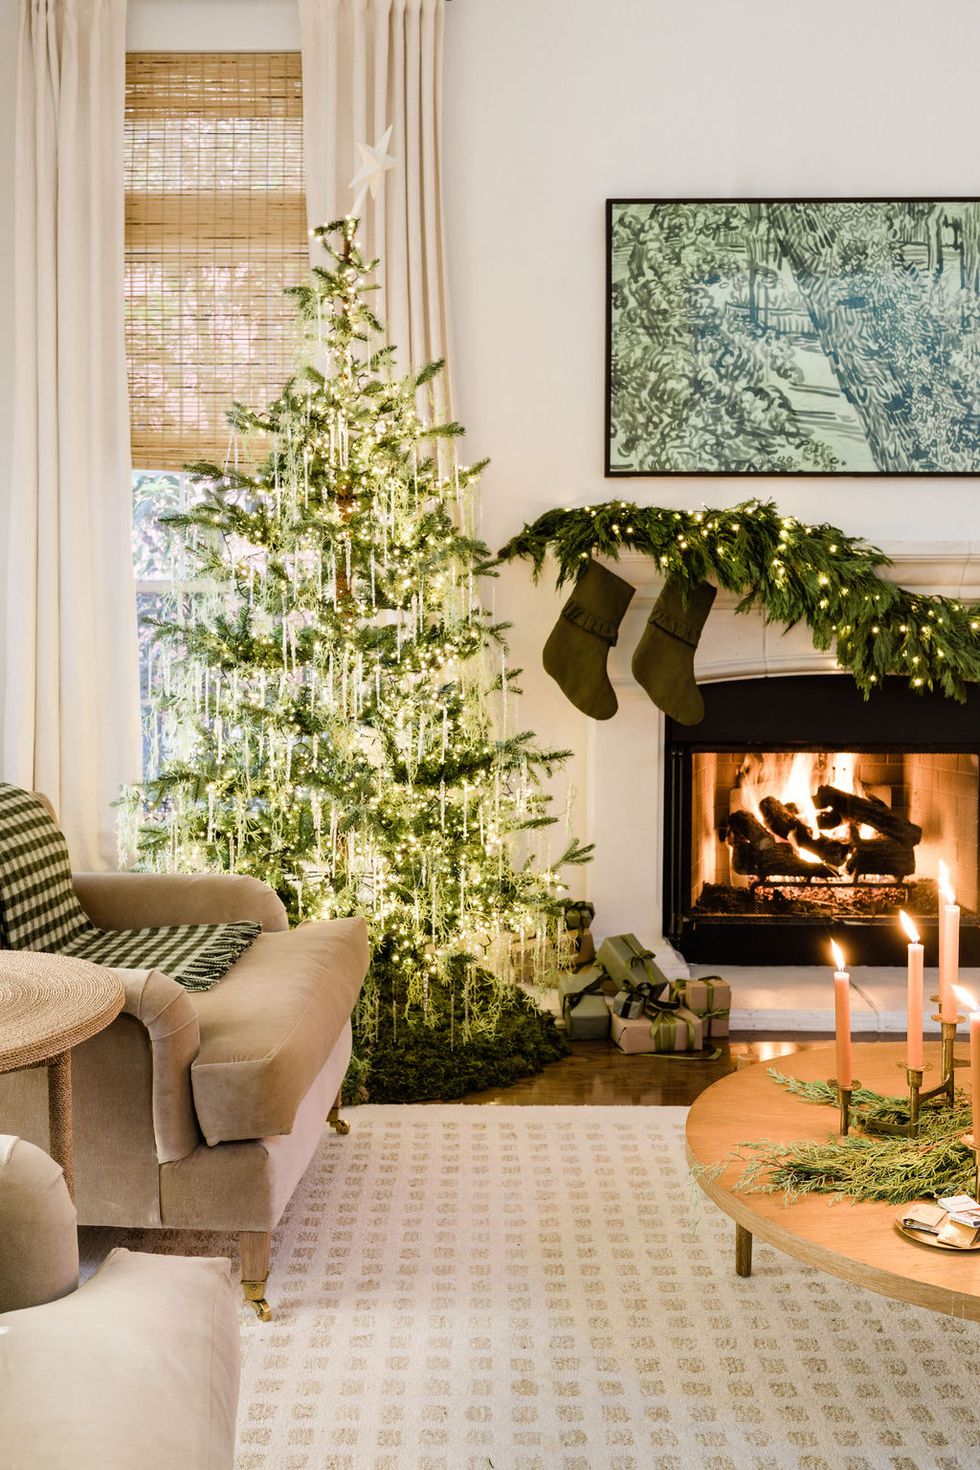 How to Trim and Decorate a Christmas Tree, According to the Martha Stewart  Editors